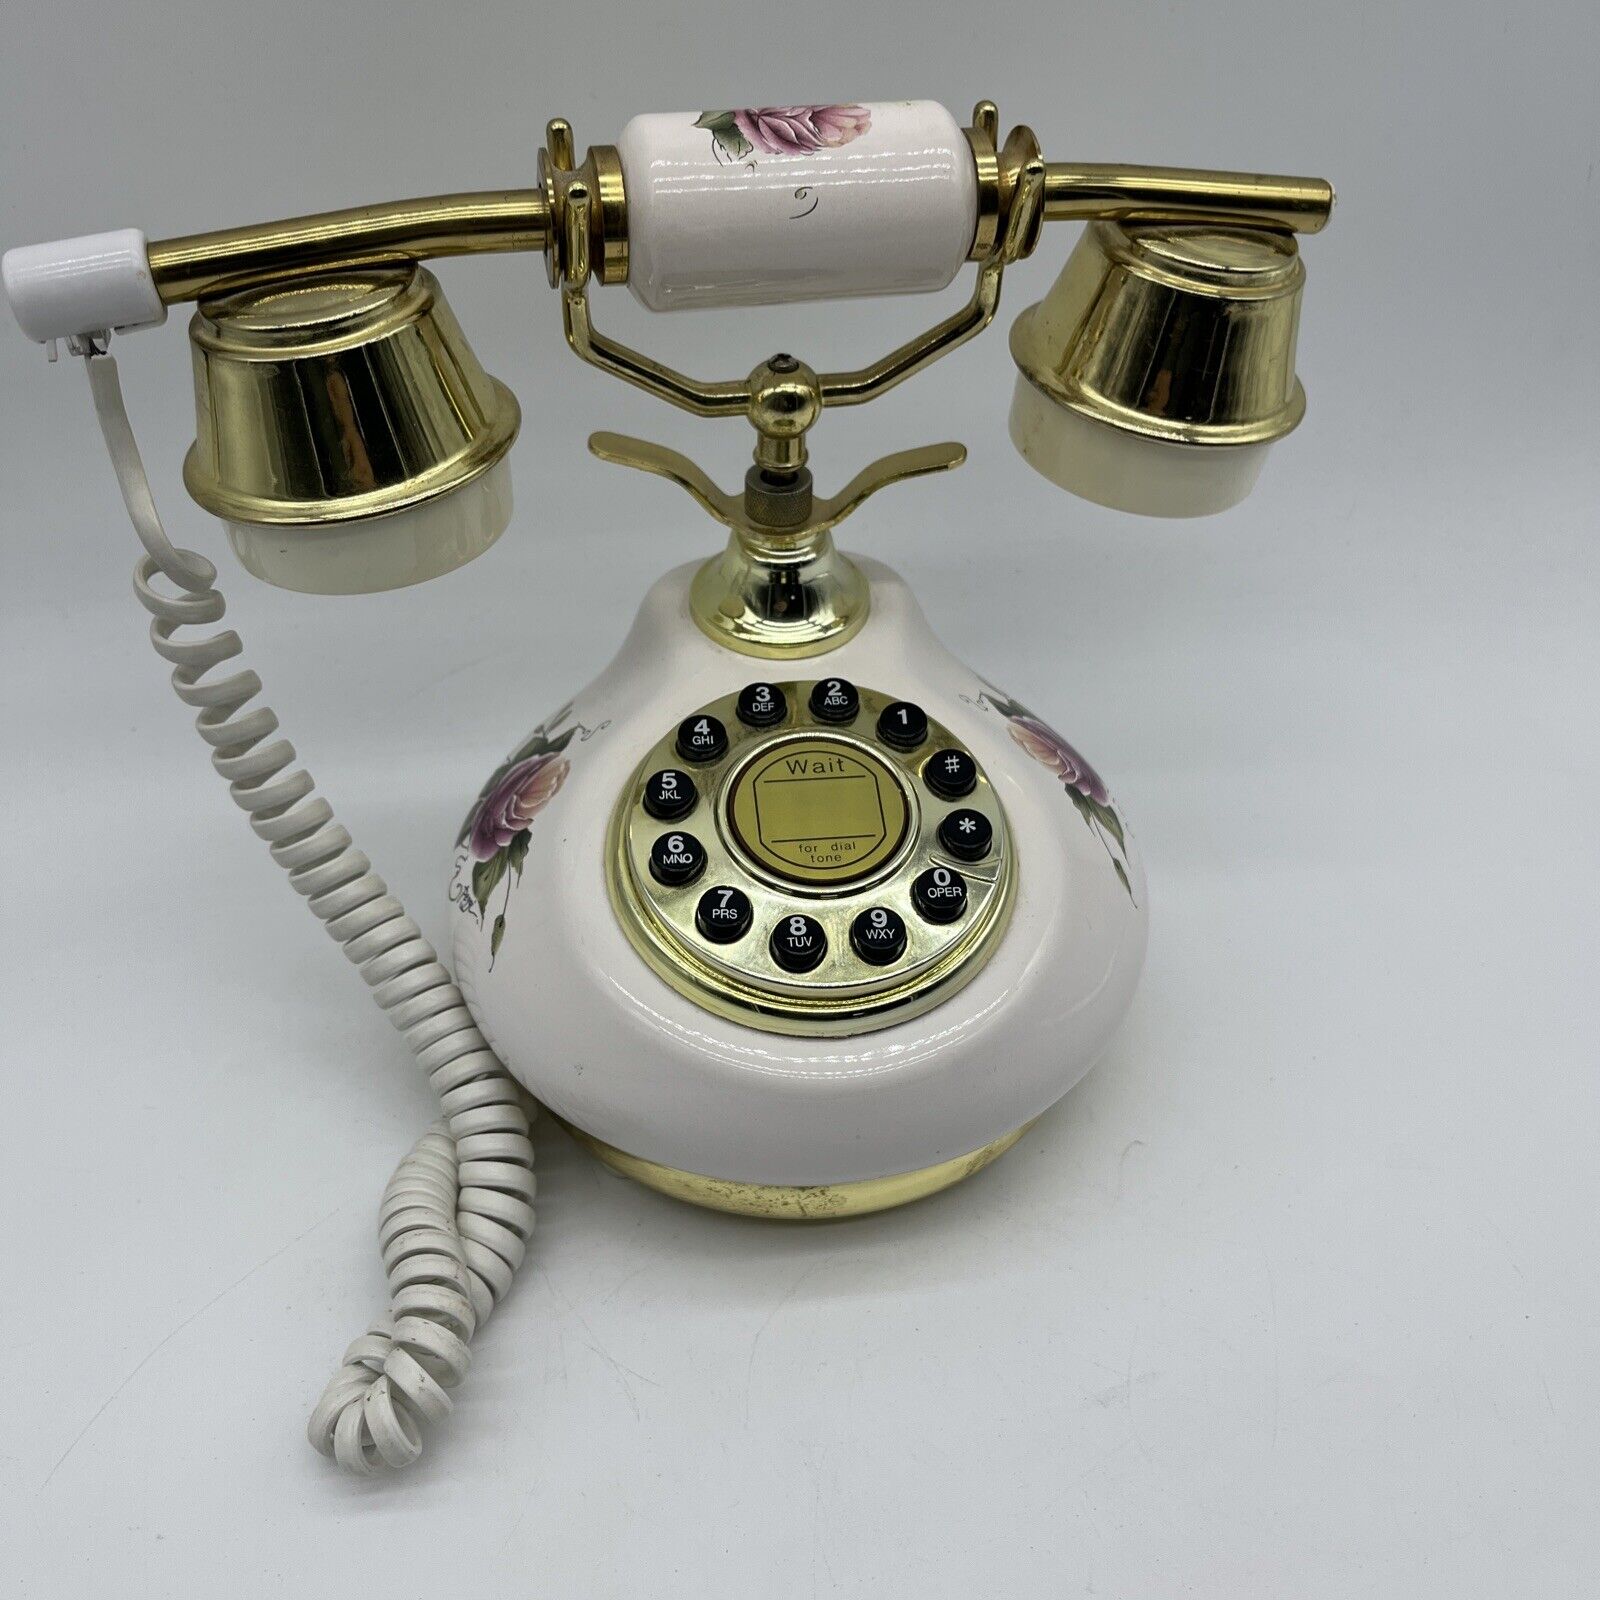 Retro Style Vintage Push Dial phone TT Systems TTS-600B Floral Works Rose Circle